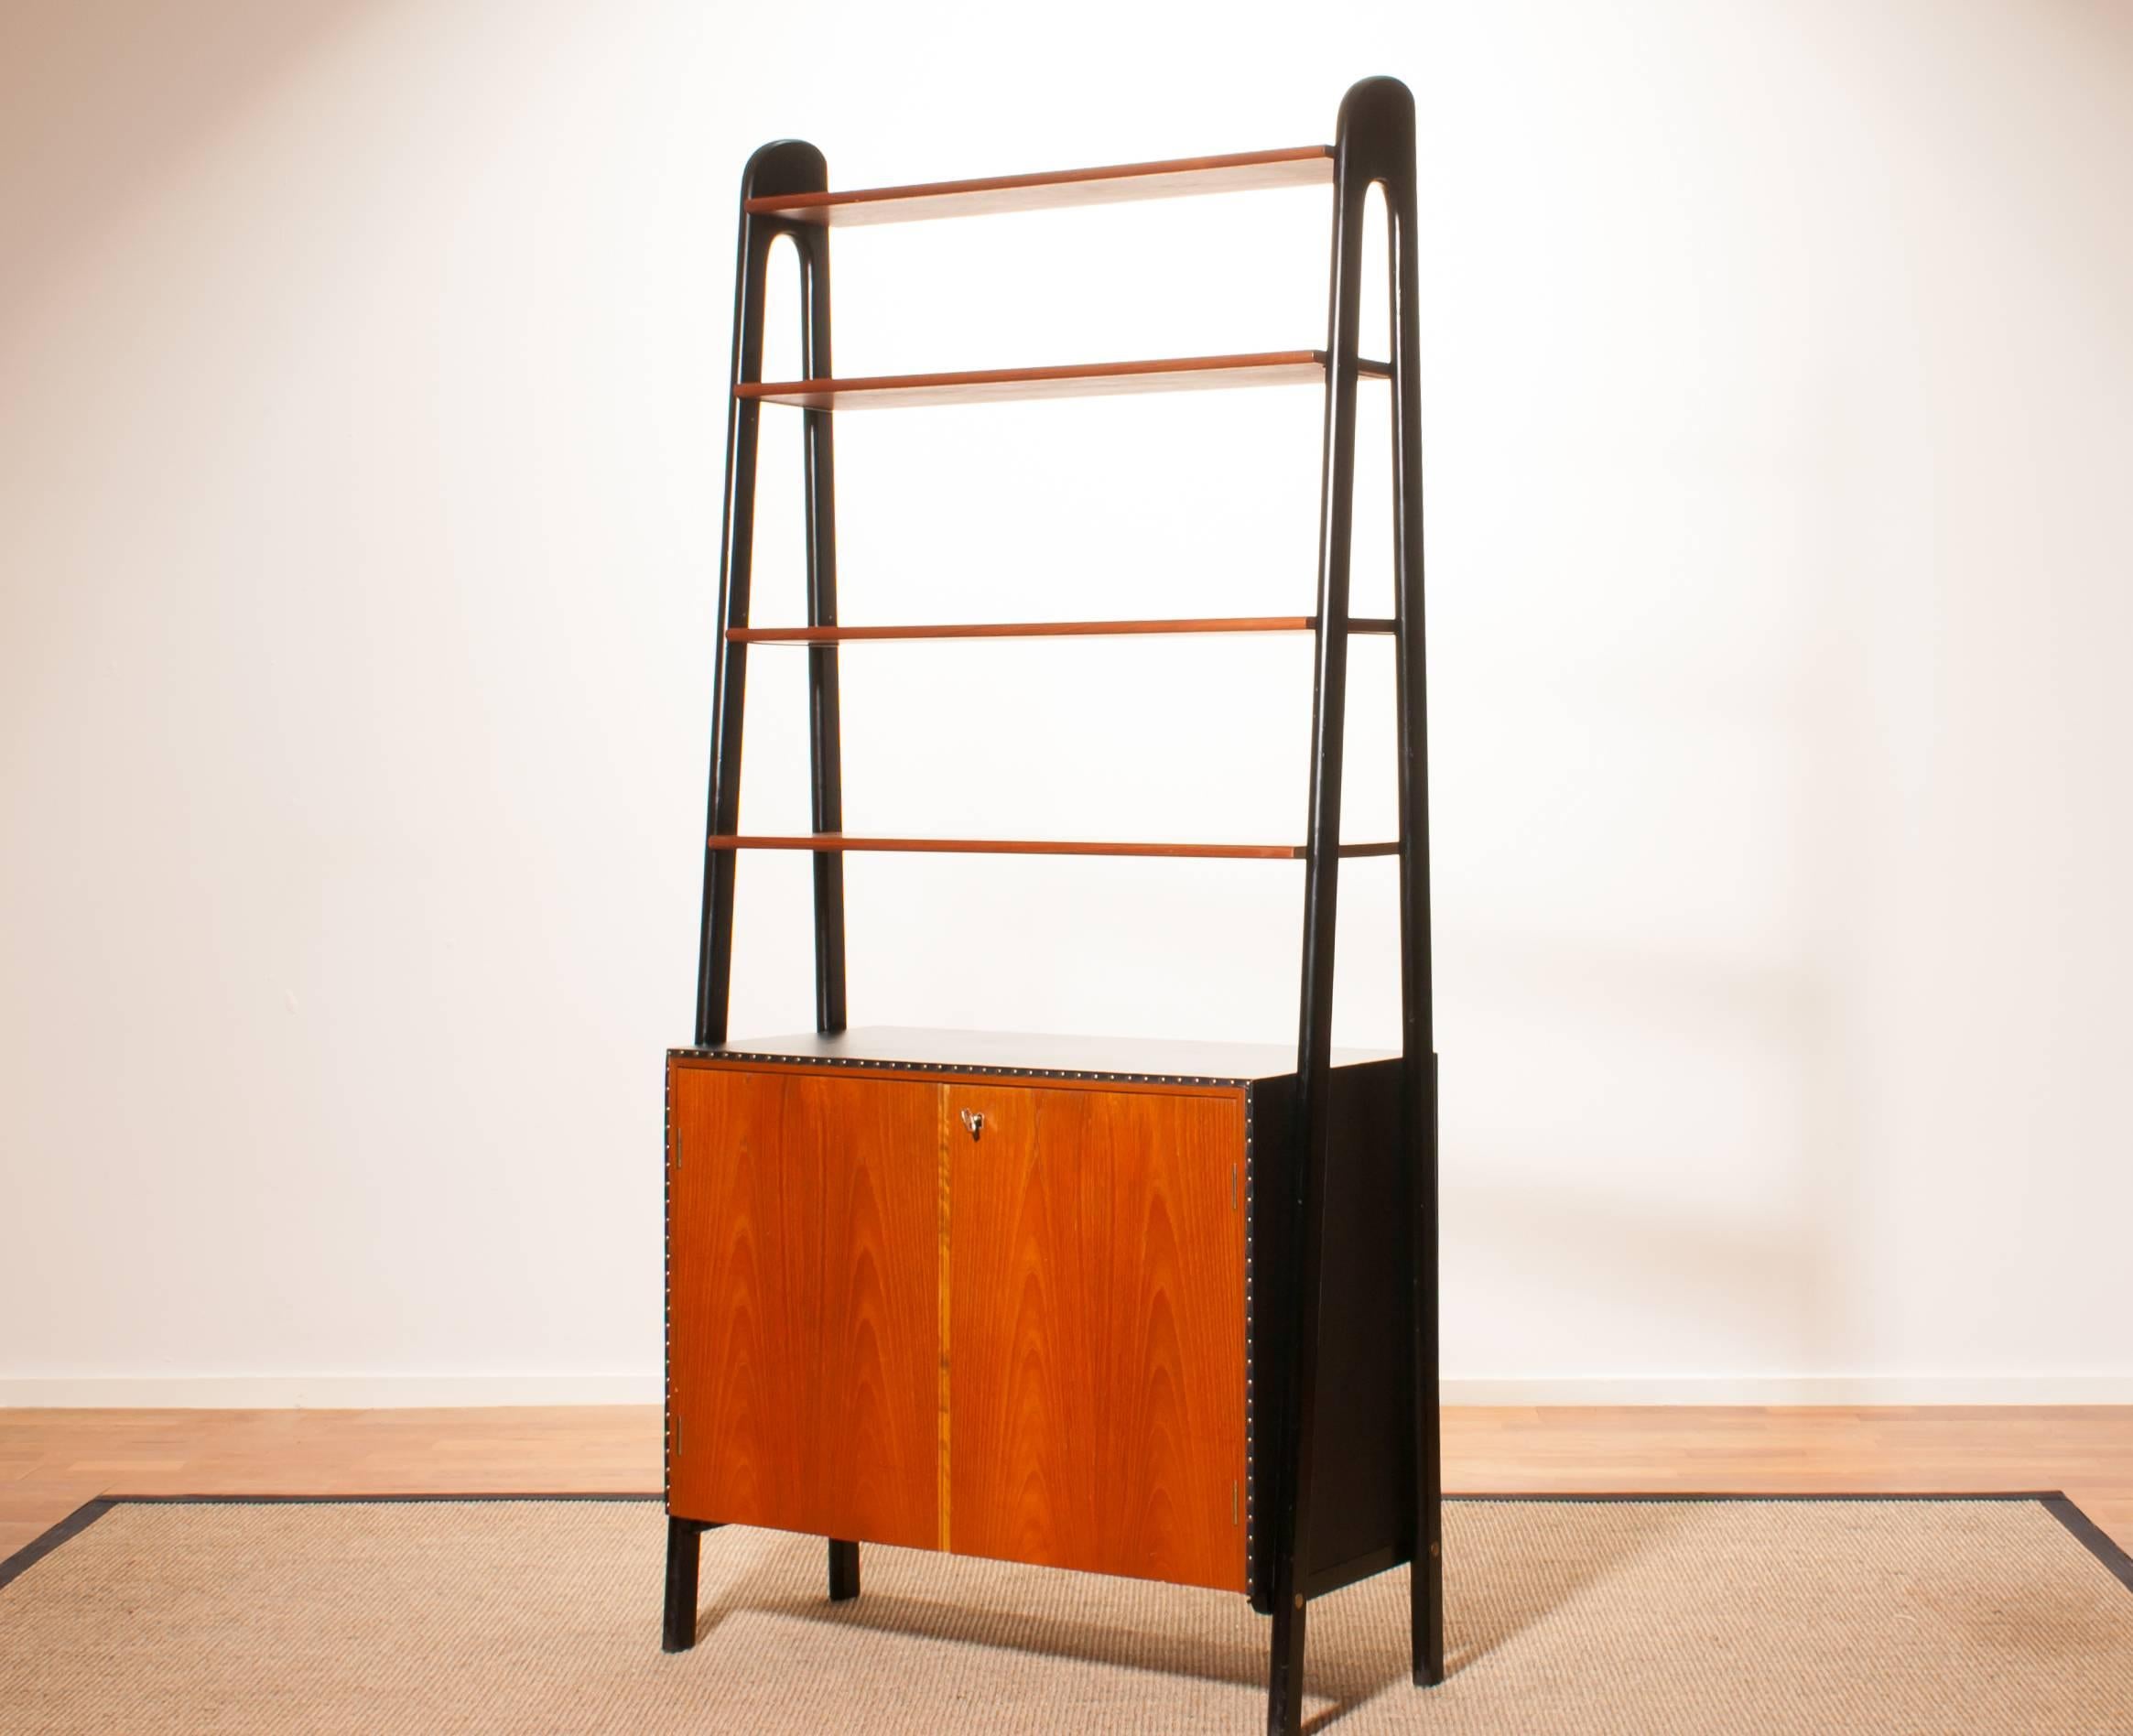 Beautiful bookcase by Bertil Fridhagen for Bodafors, Sweden.
This cabinet is made of teak and cupboard is upholstered with black leatherette.
Behind the doors there is an extendable writing top with a drawer.
It is in an excellent